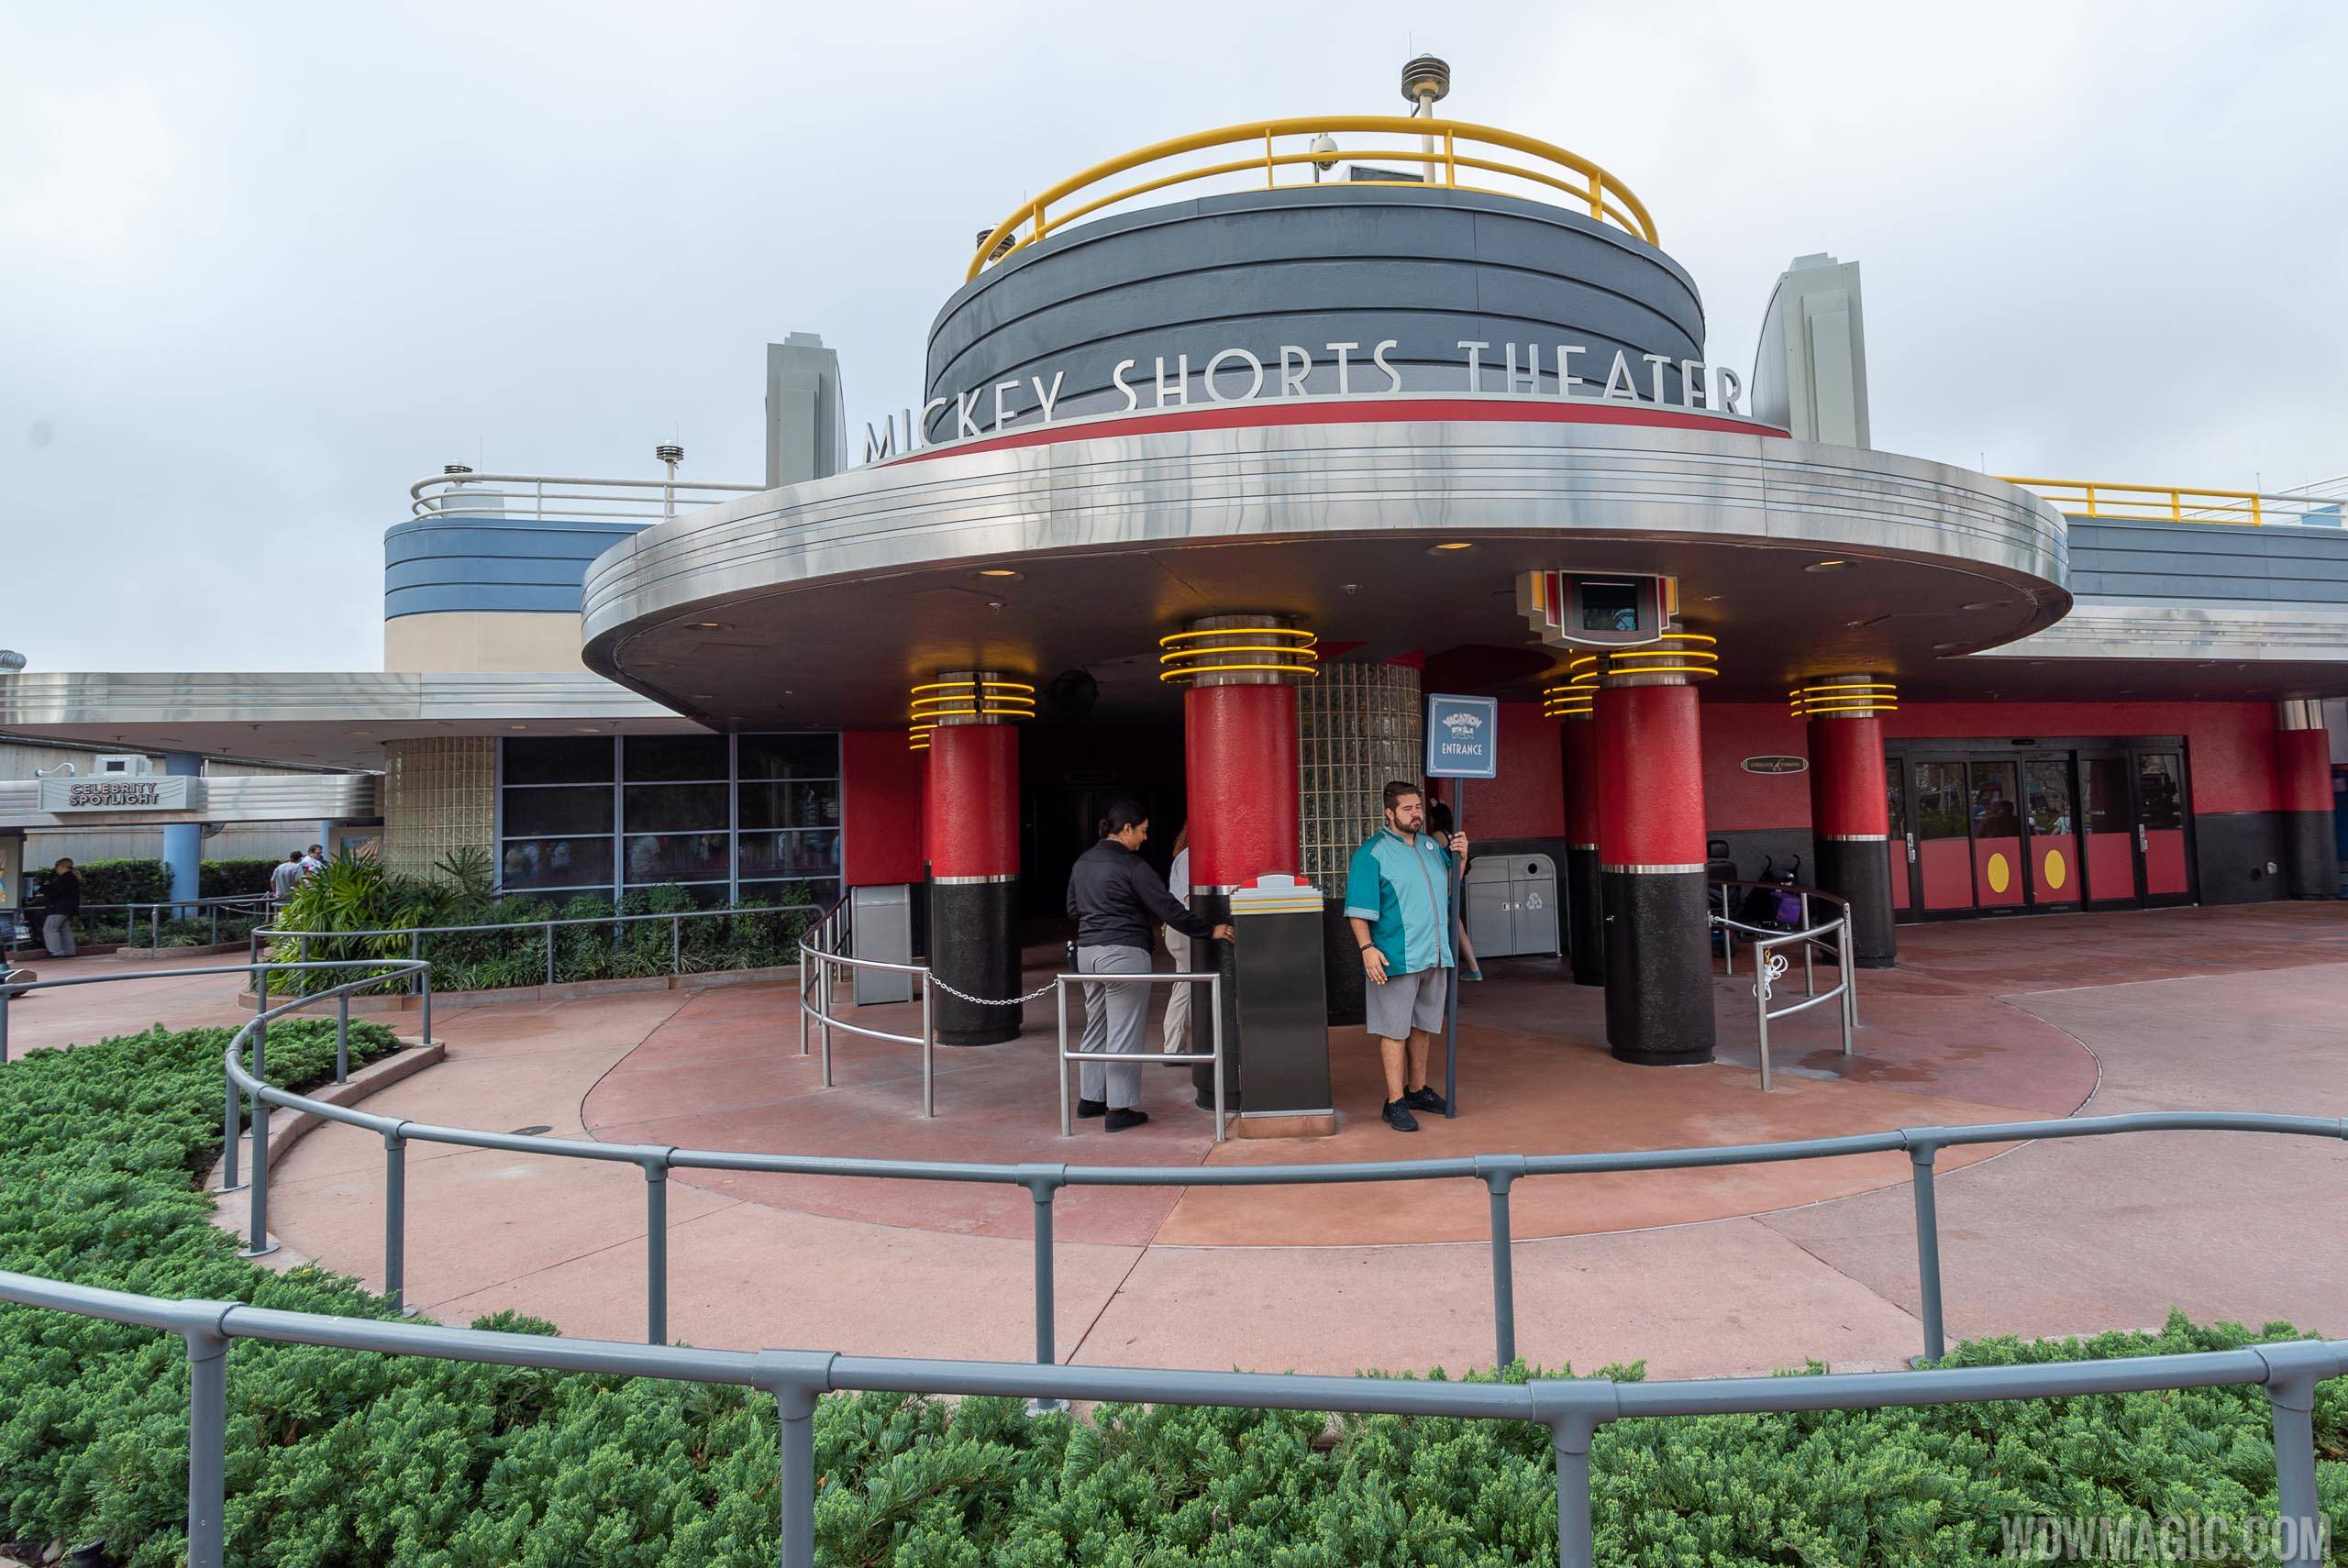 Mickey Shorts Theater overview